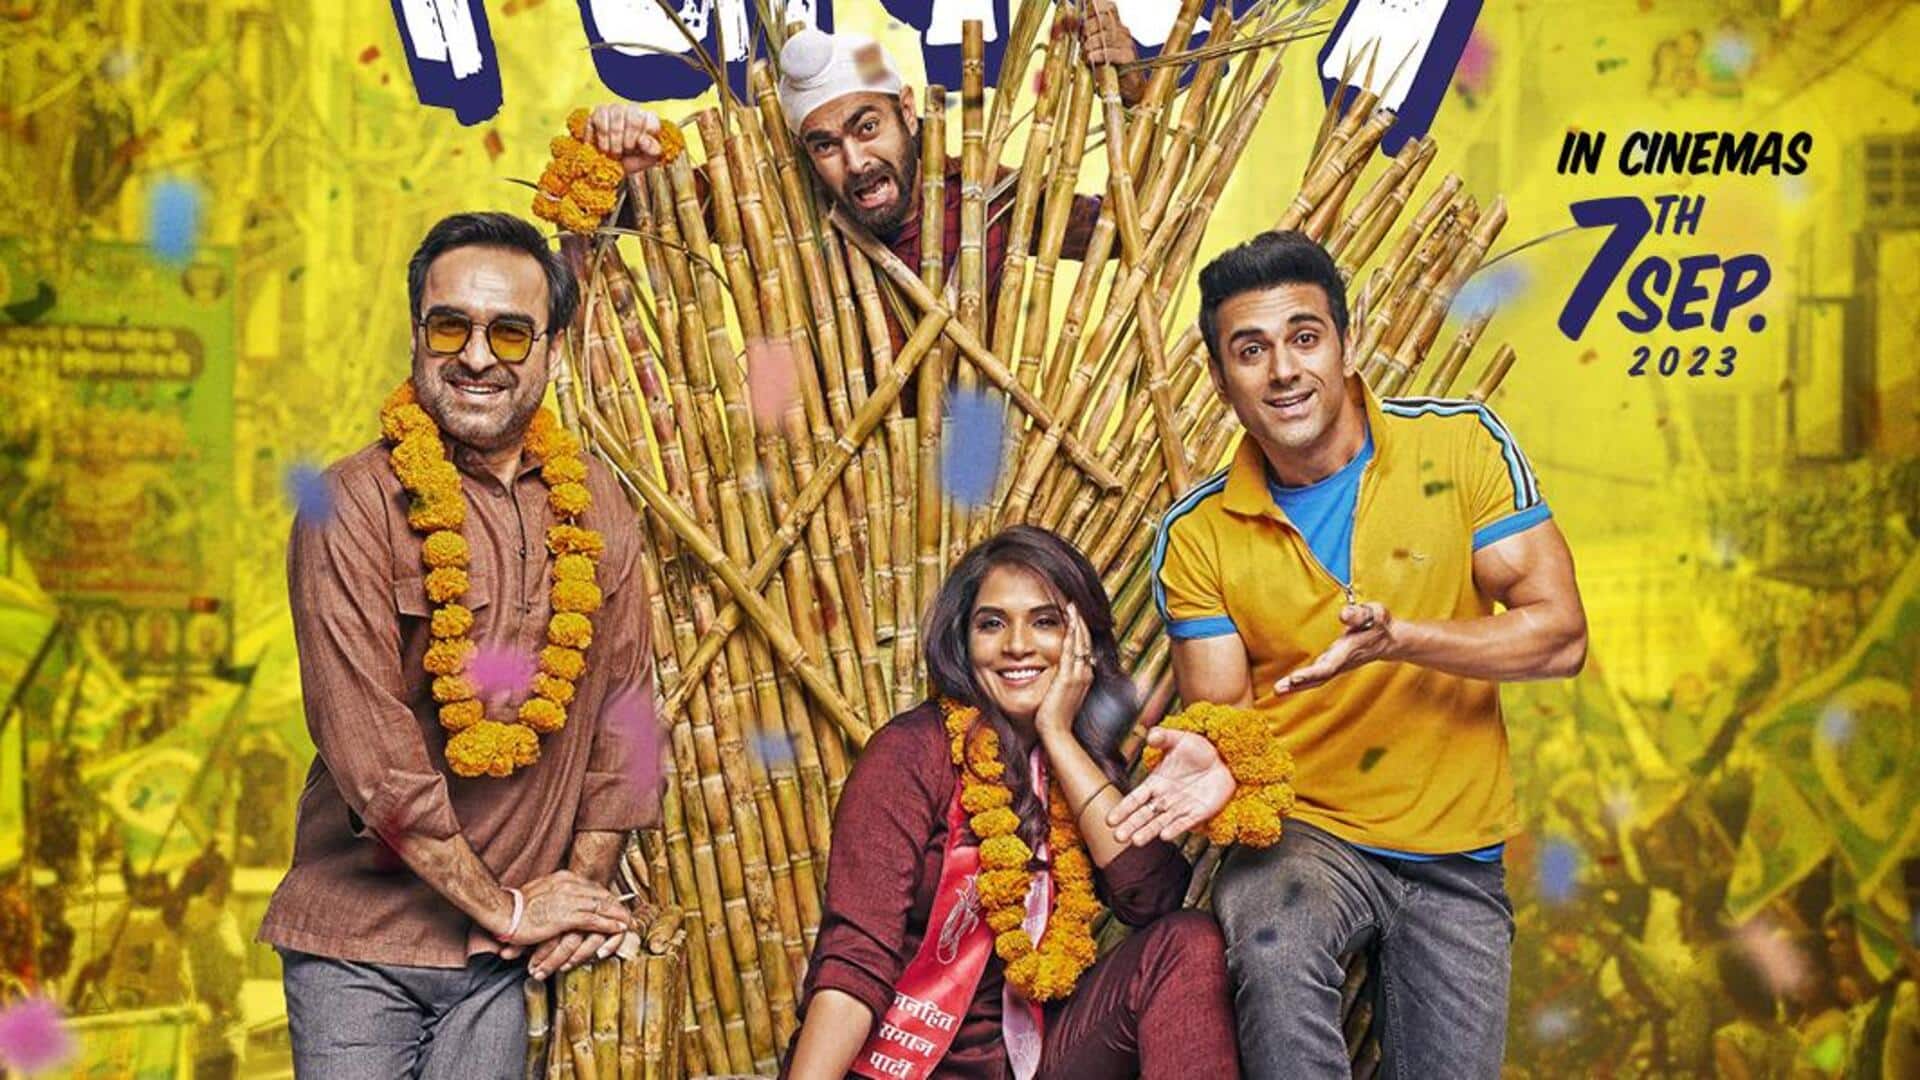 Box office collection: 'Fukrey 3' surpasses Rs. 50cr mark